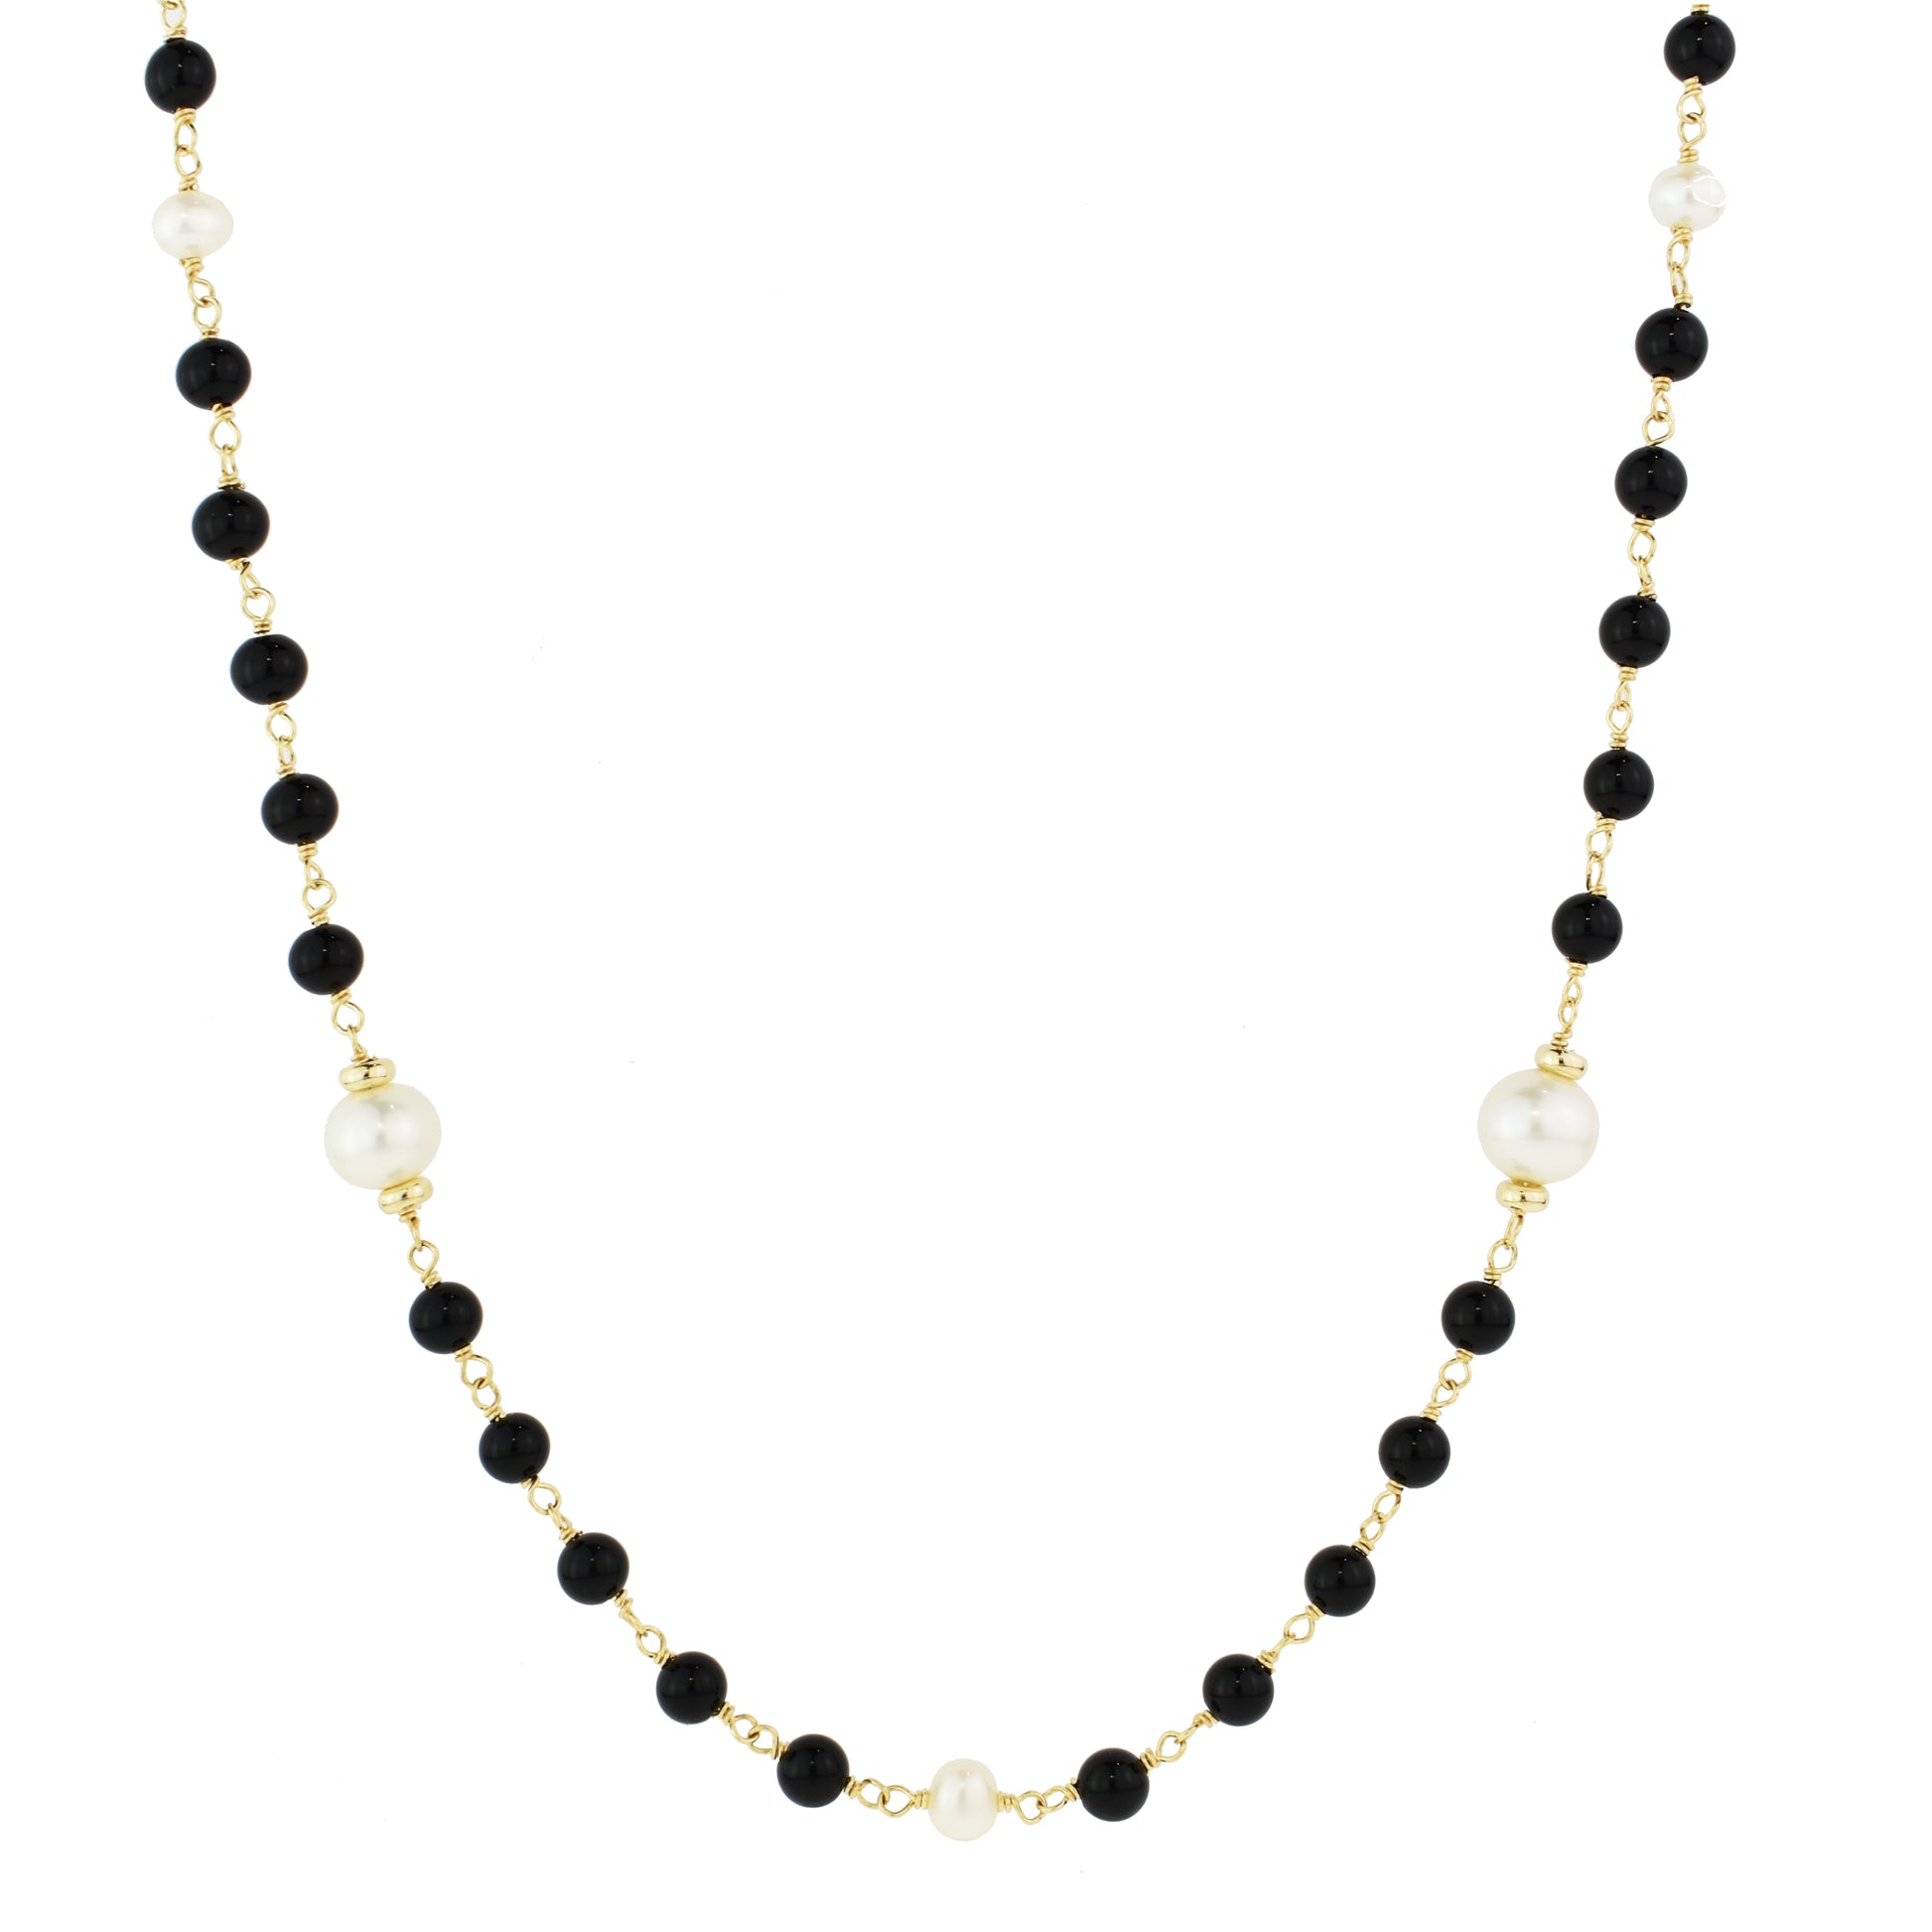 14k Black Onyx and White Freshwater Pearl Necklace 36"